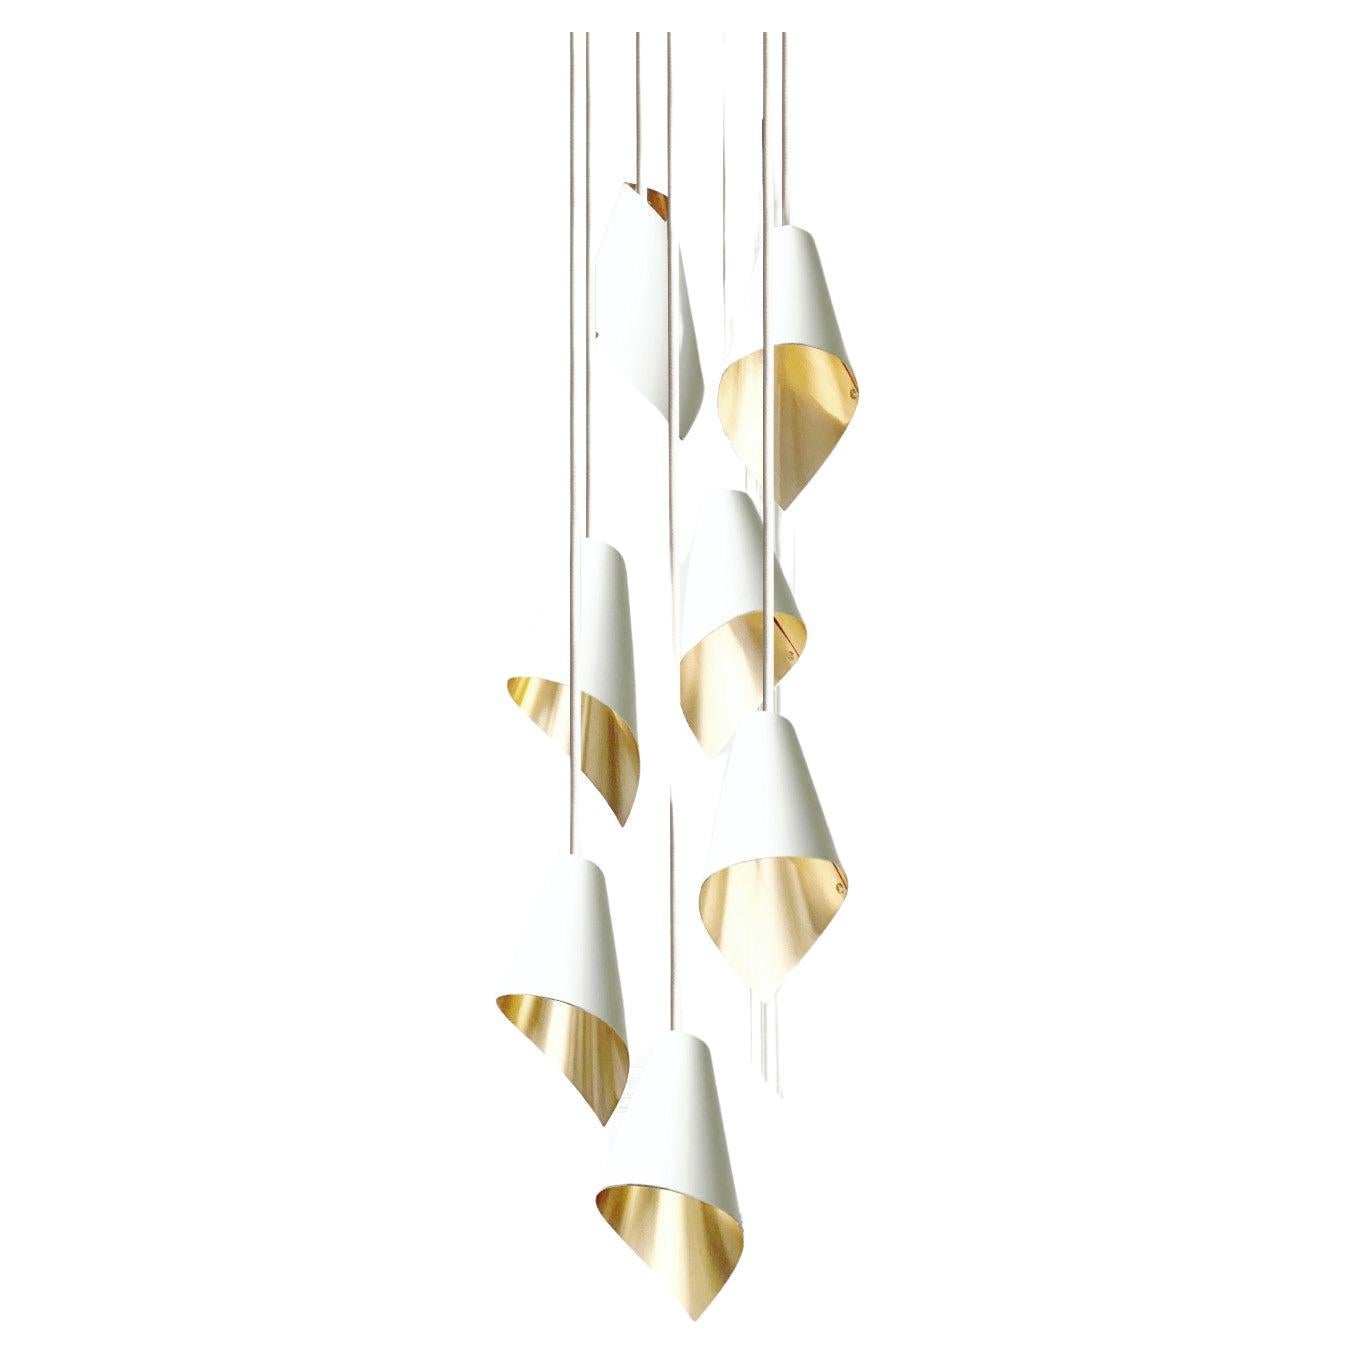 ARC 7 Modern Pendant Light in White and Brushed Brass Made in Britain For Sale